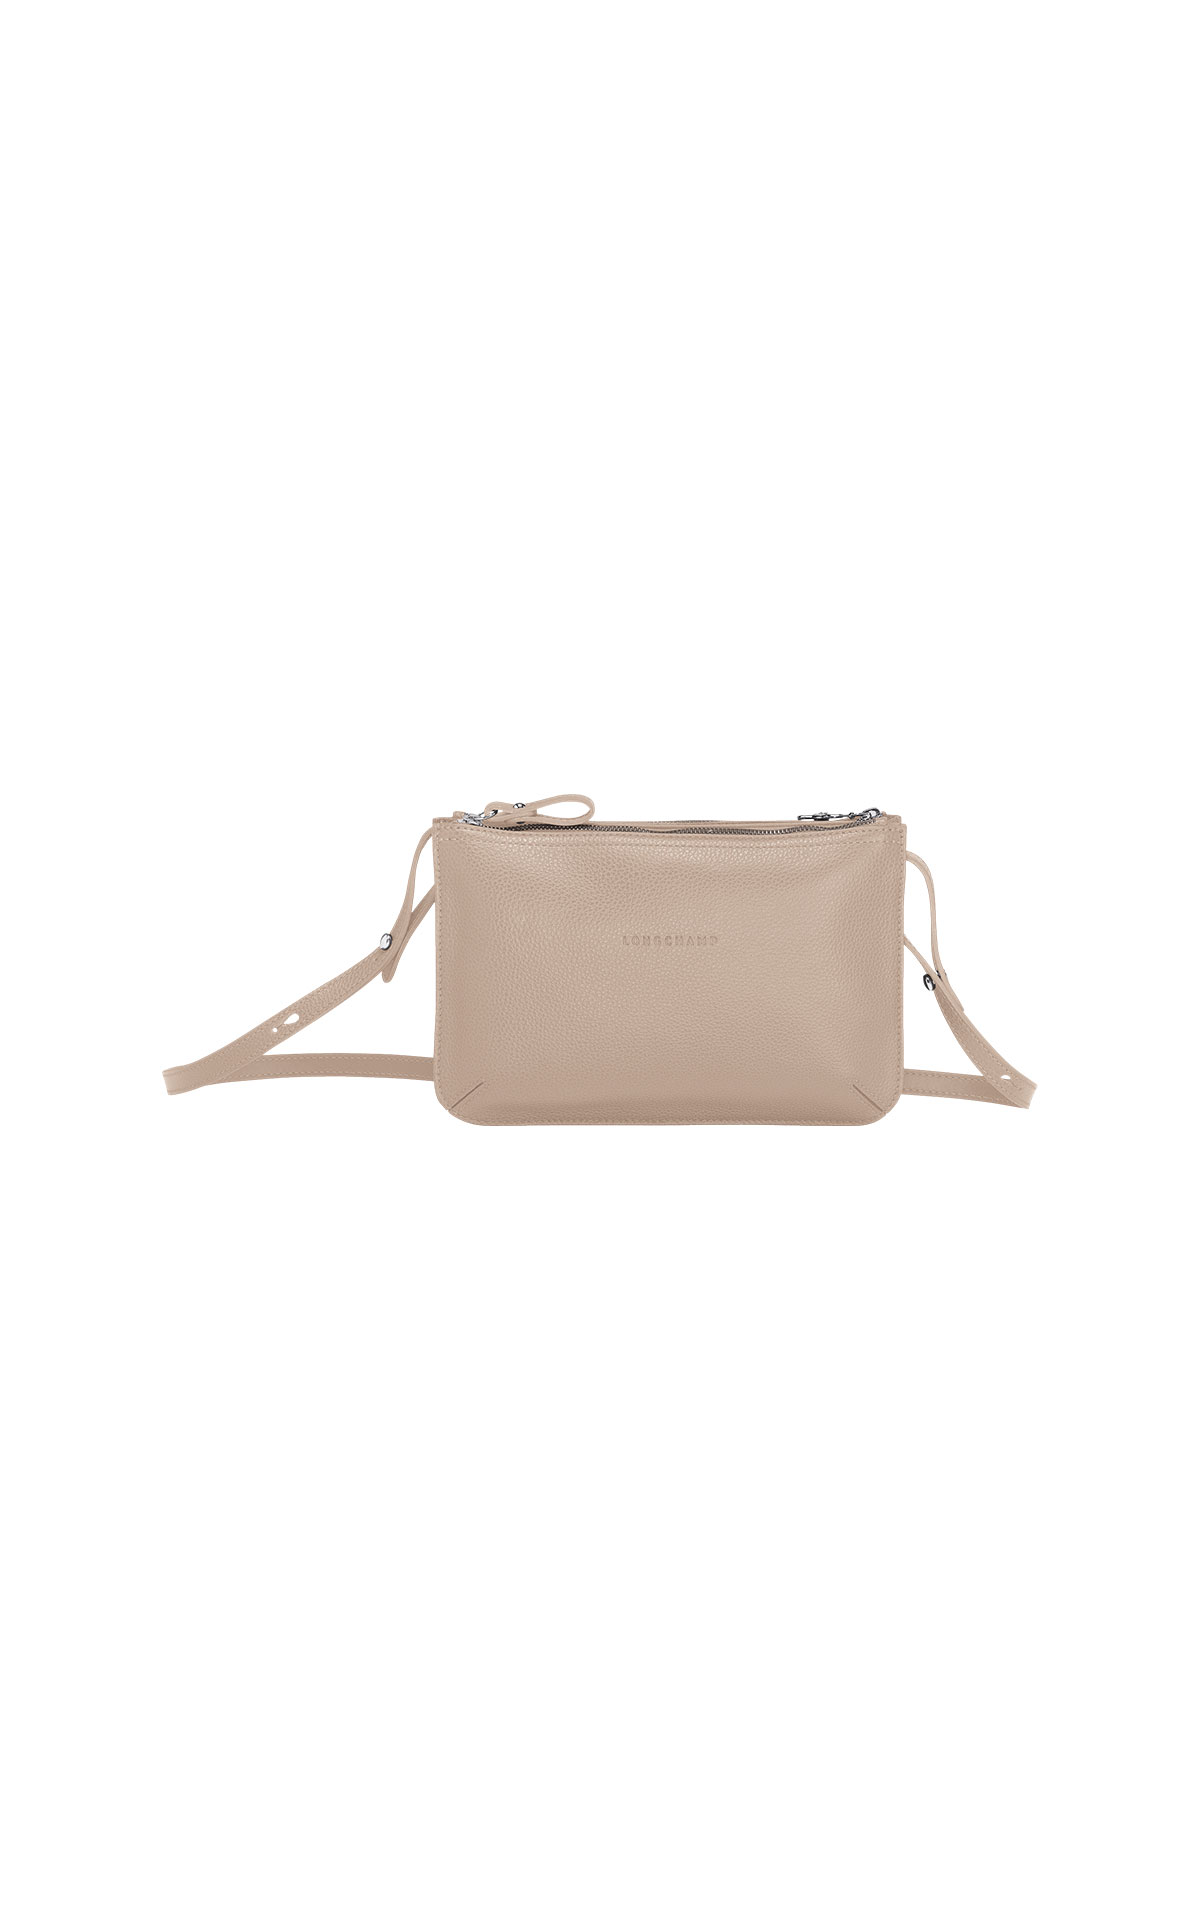 Longchamp Le foulonne crossbody bag from Bicester Village